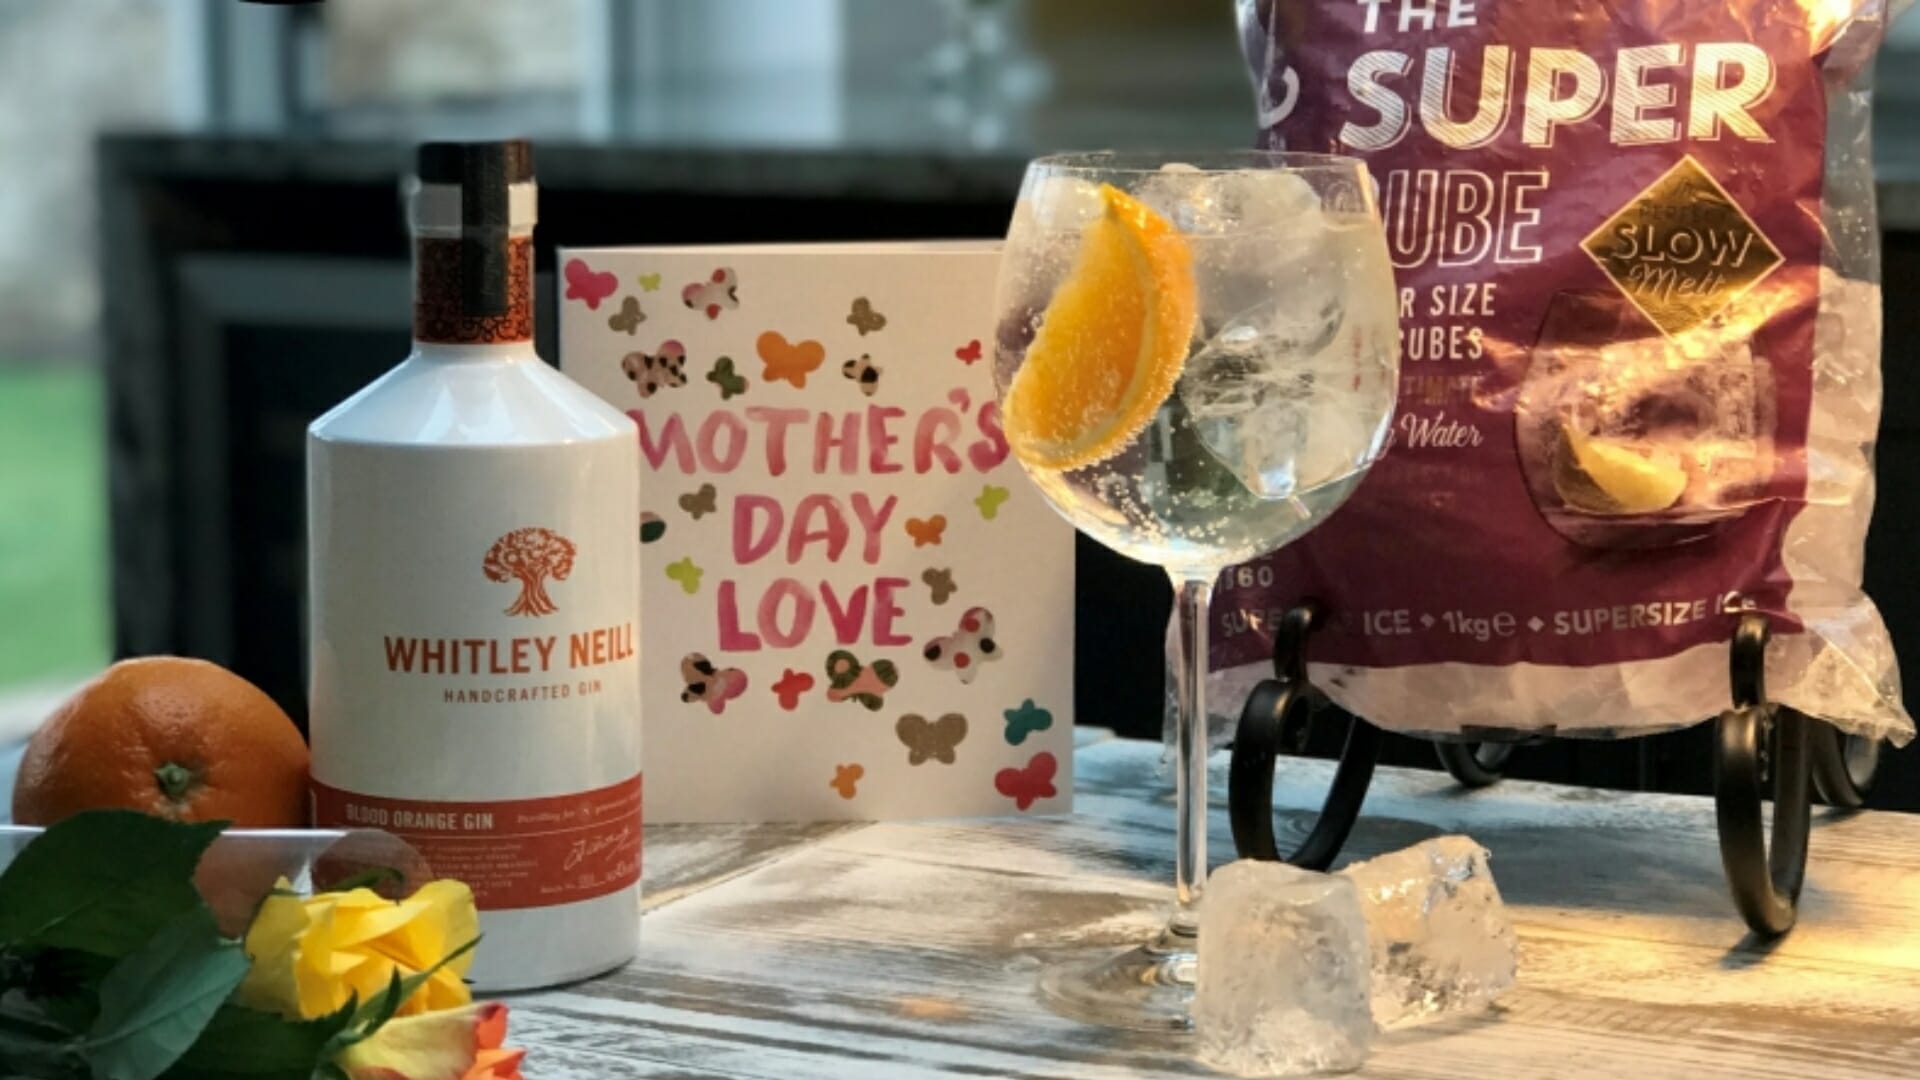 The-ice-co-and-whitley-neill-blood-orange-gin